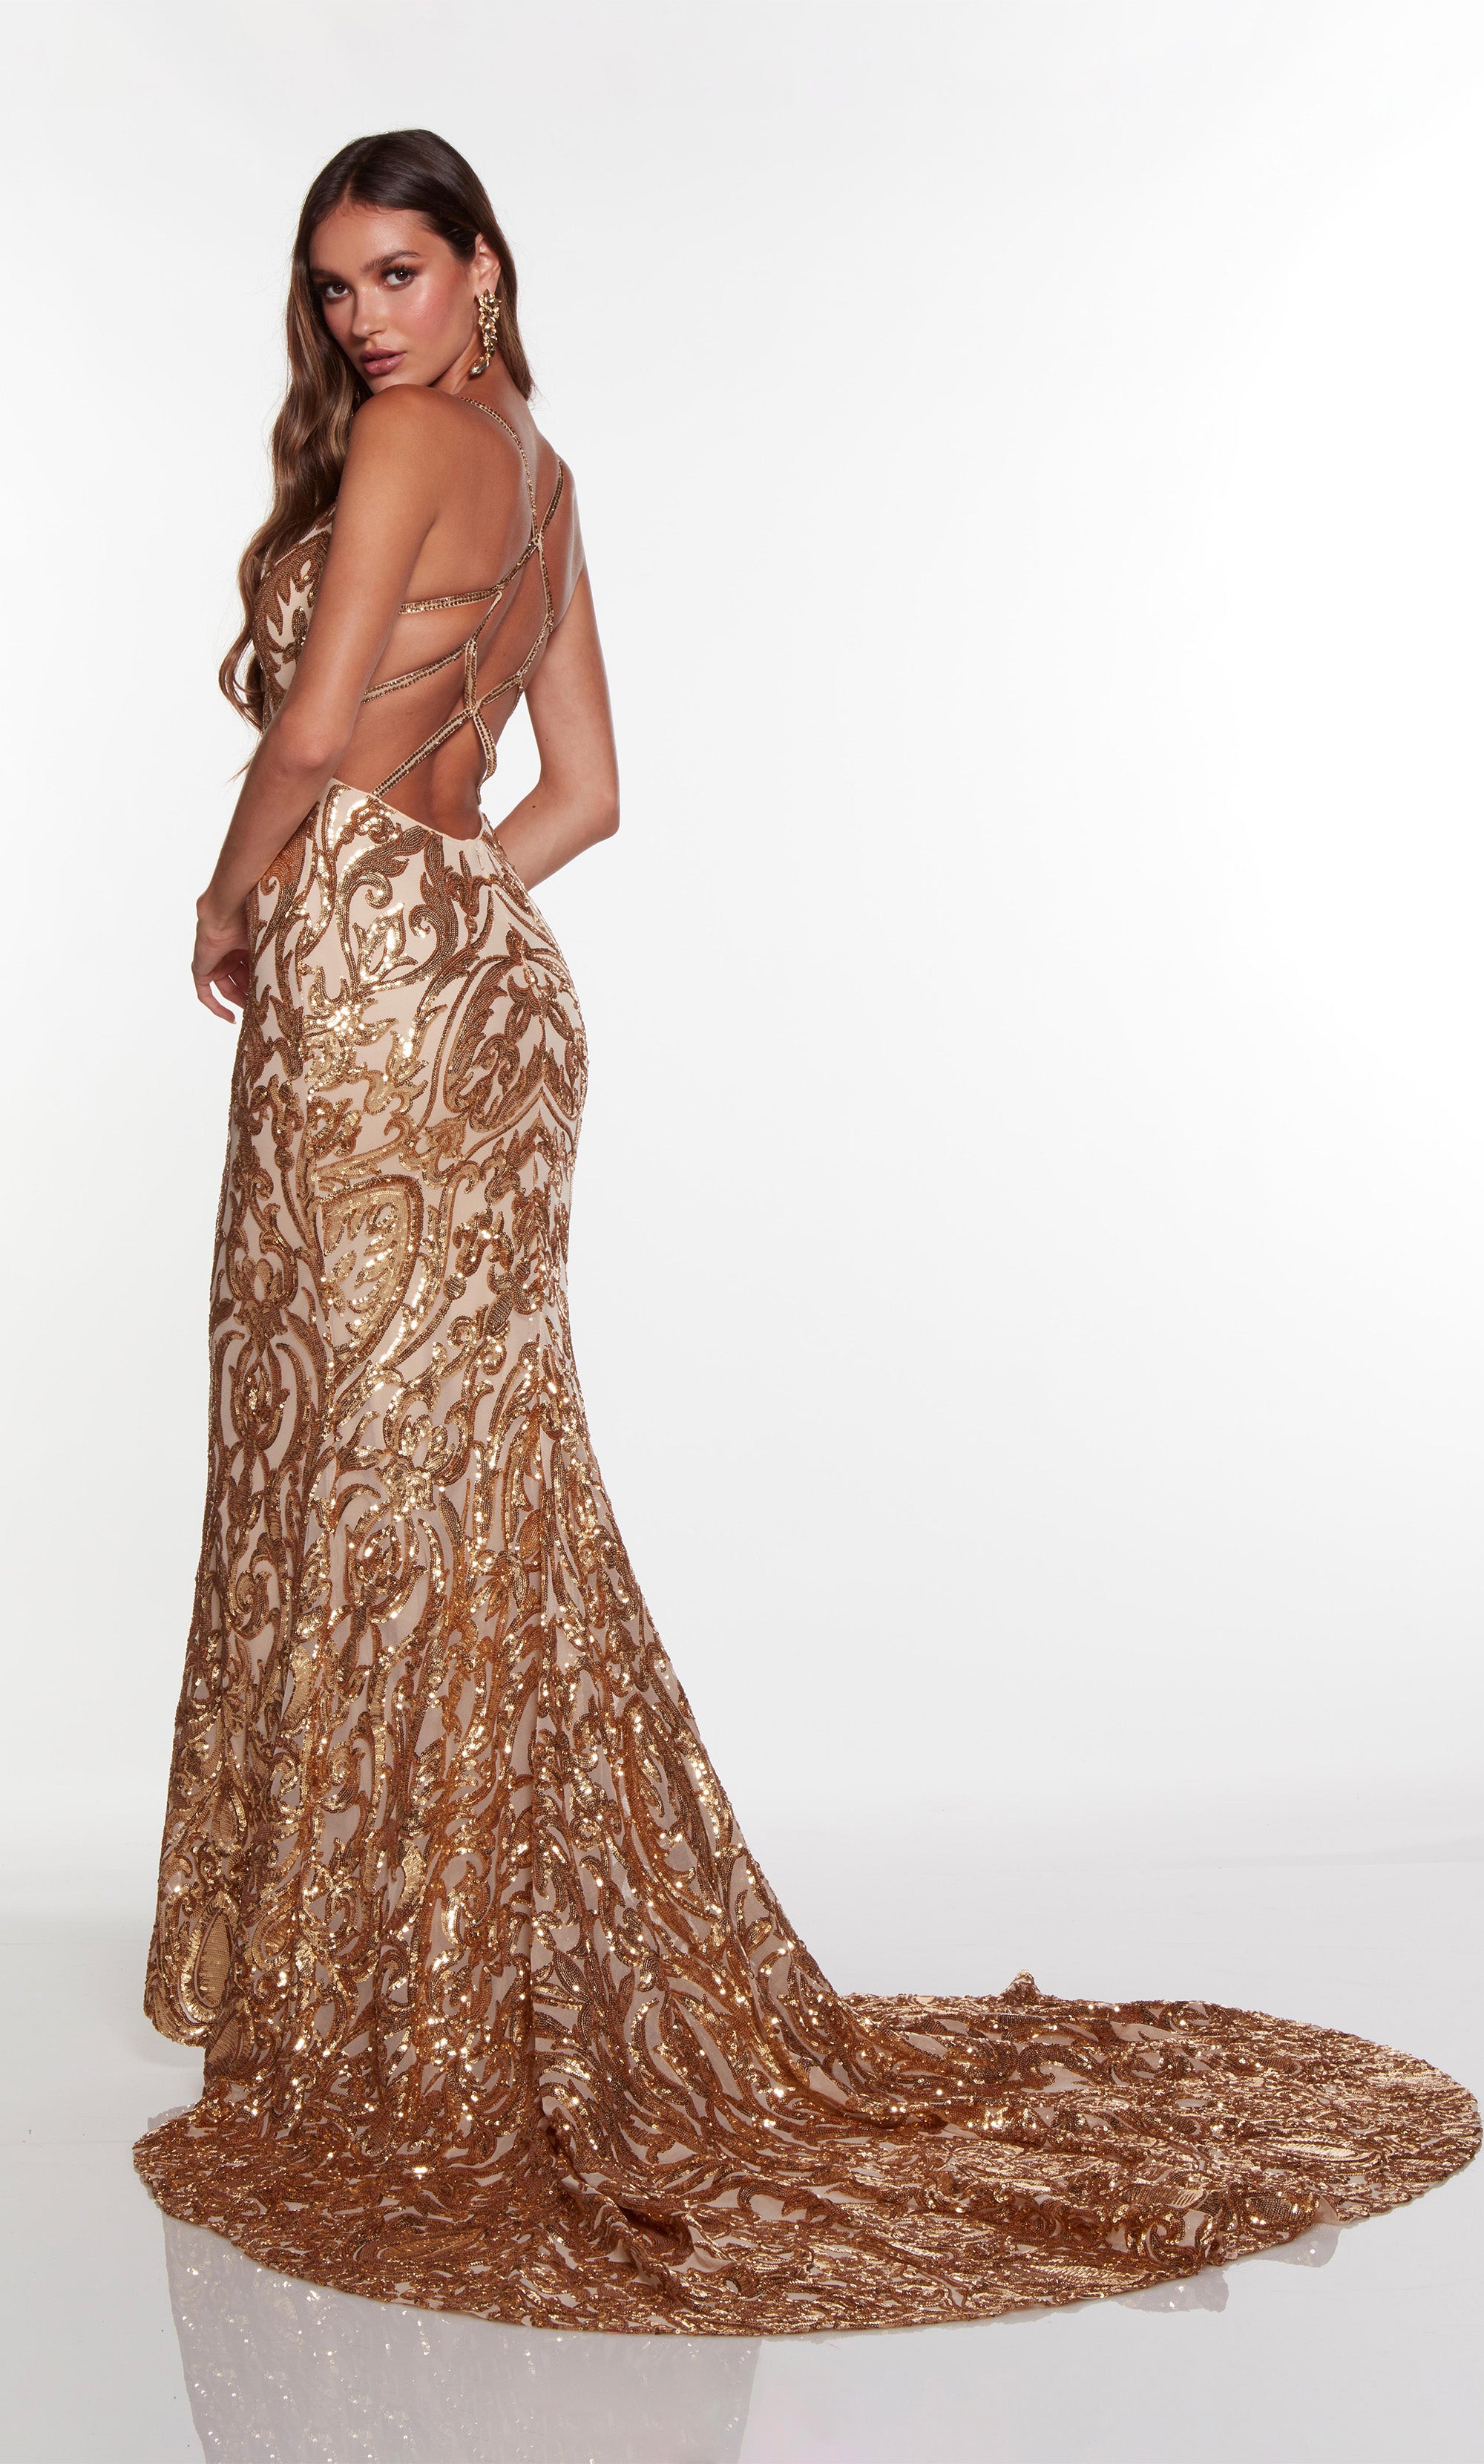 Elegant evening gown with a plunging neckline.